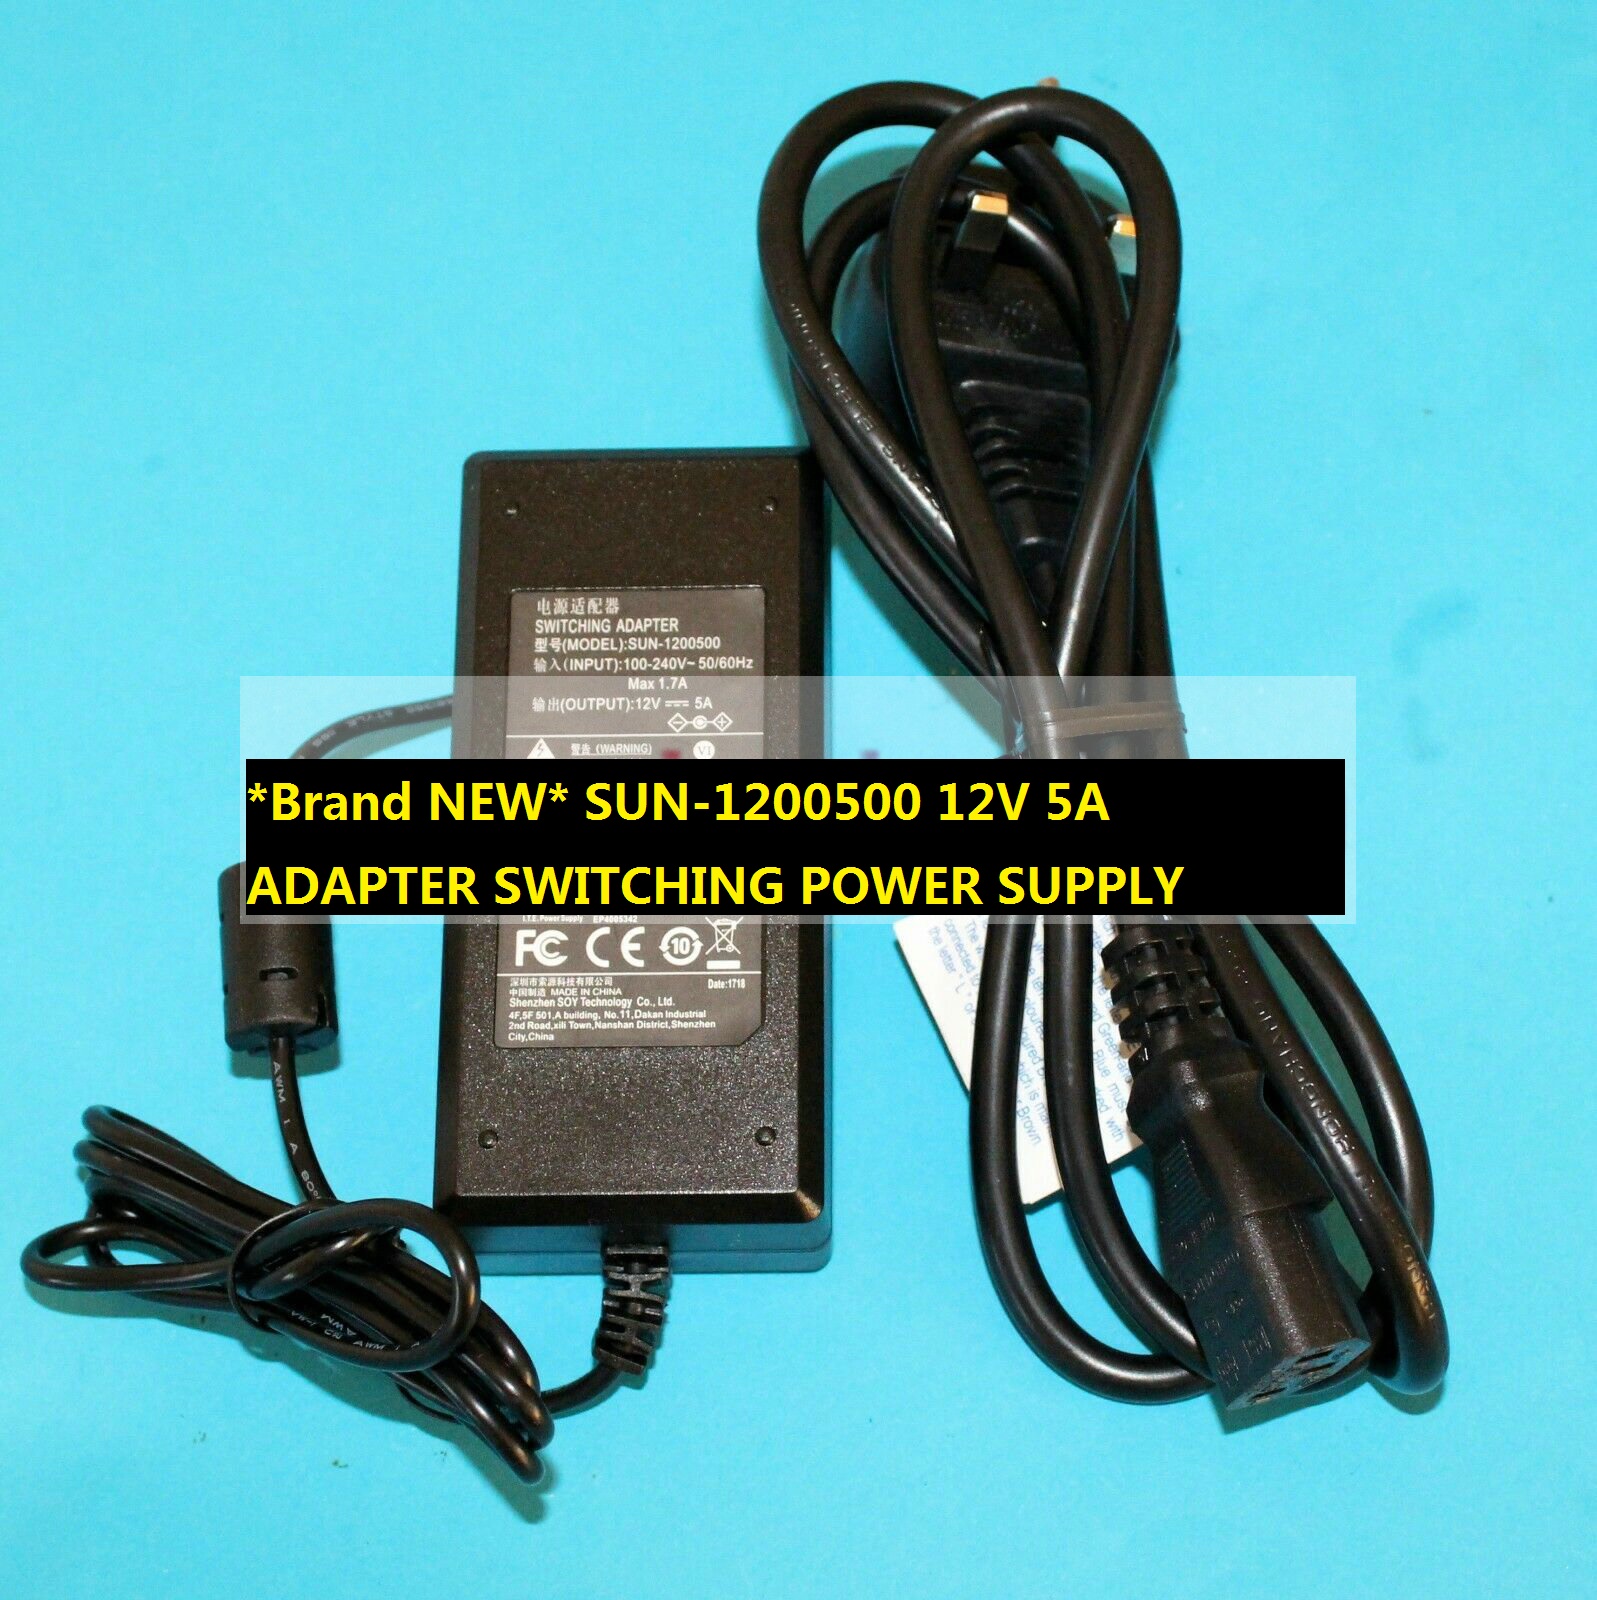 *Brand NEW* SUN-1200500 12V 5A ADAPTER SWITCHING POWER SUPPLY